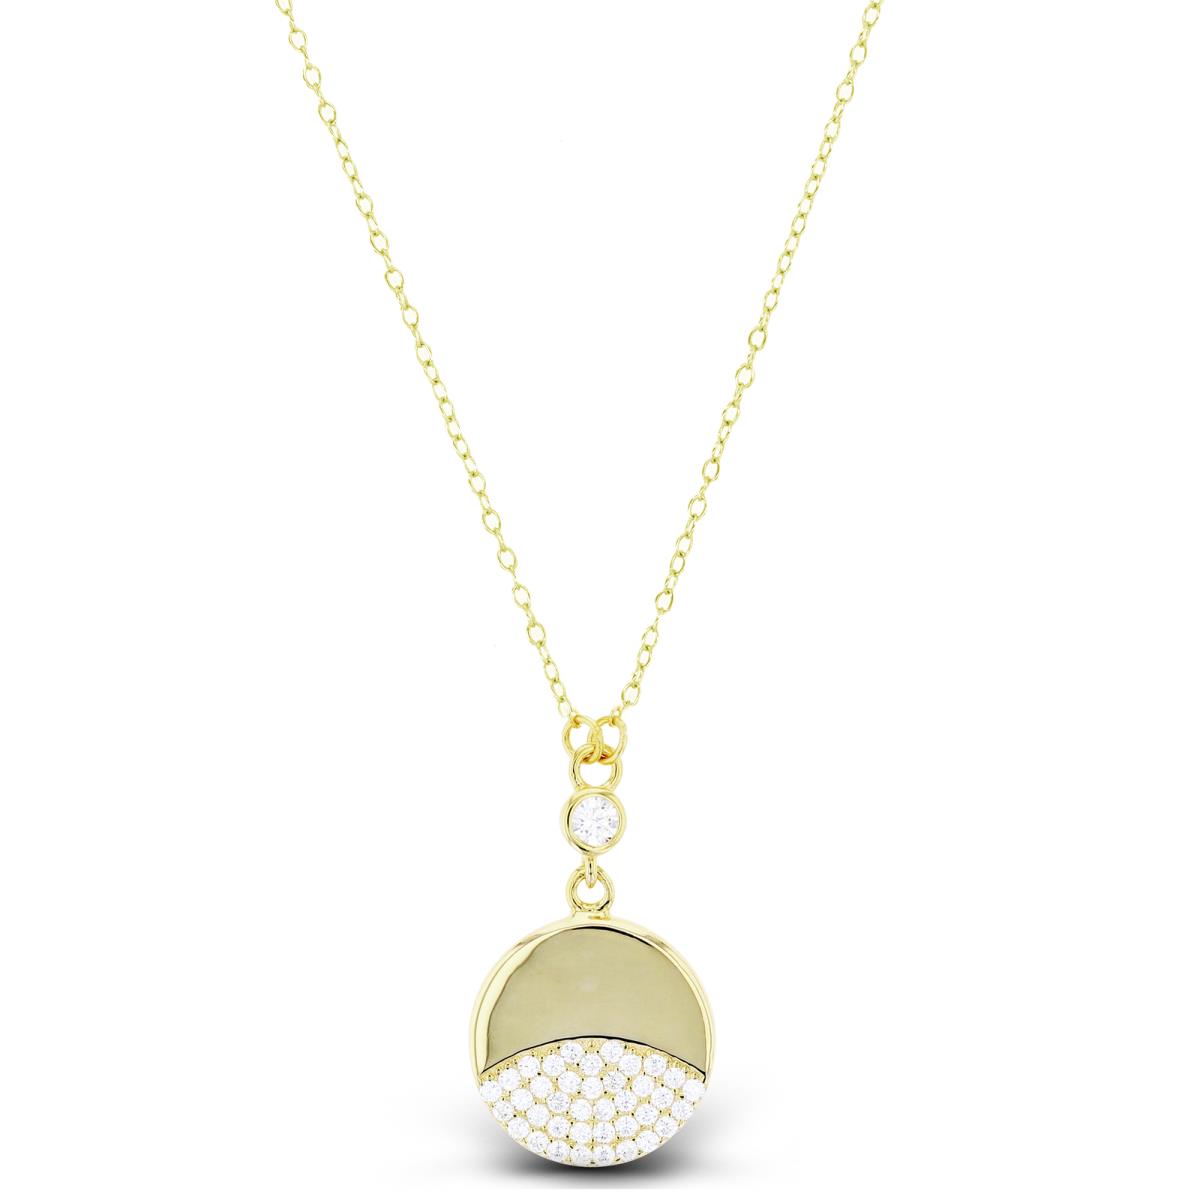 Sterling Silver+1Micron Yellow Gold Half High Polish & Half Micropave Rnd White CZ Circle 16+2"Necklace